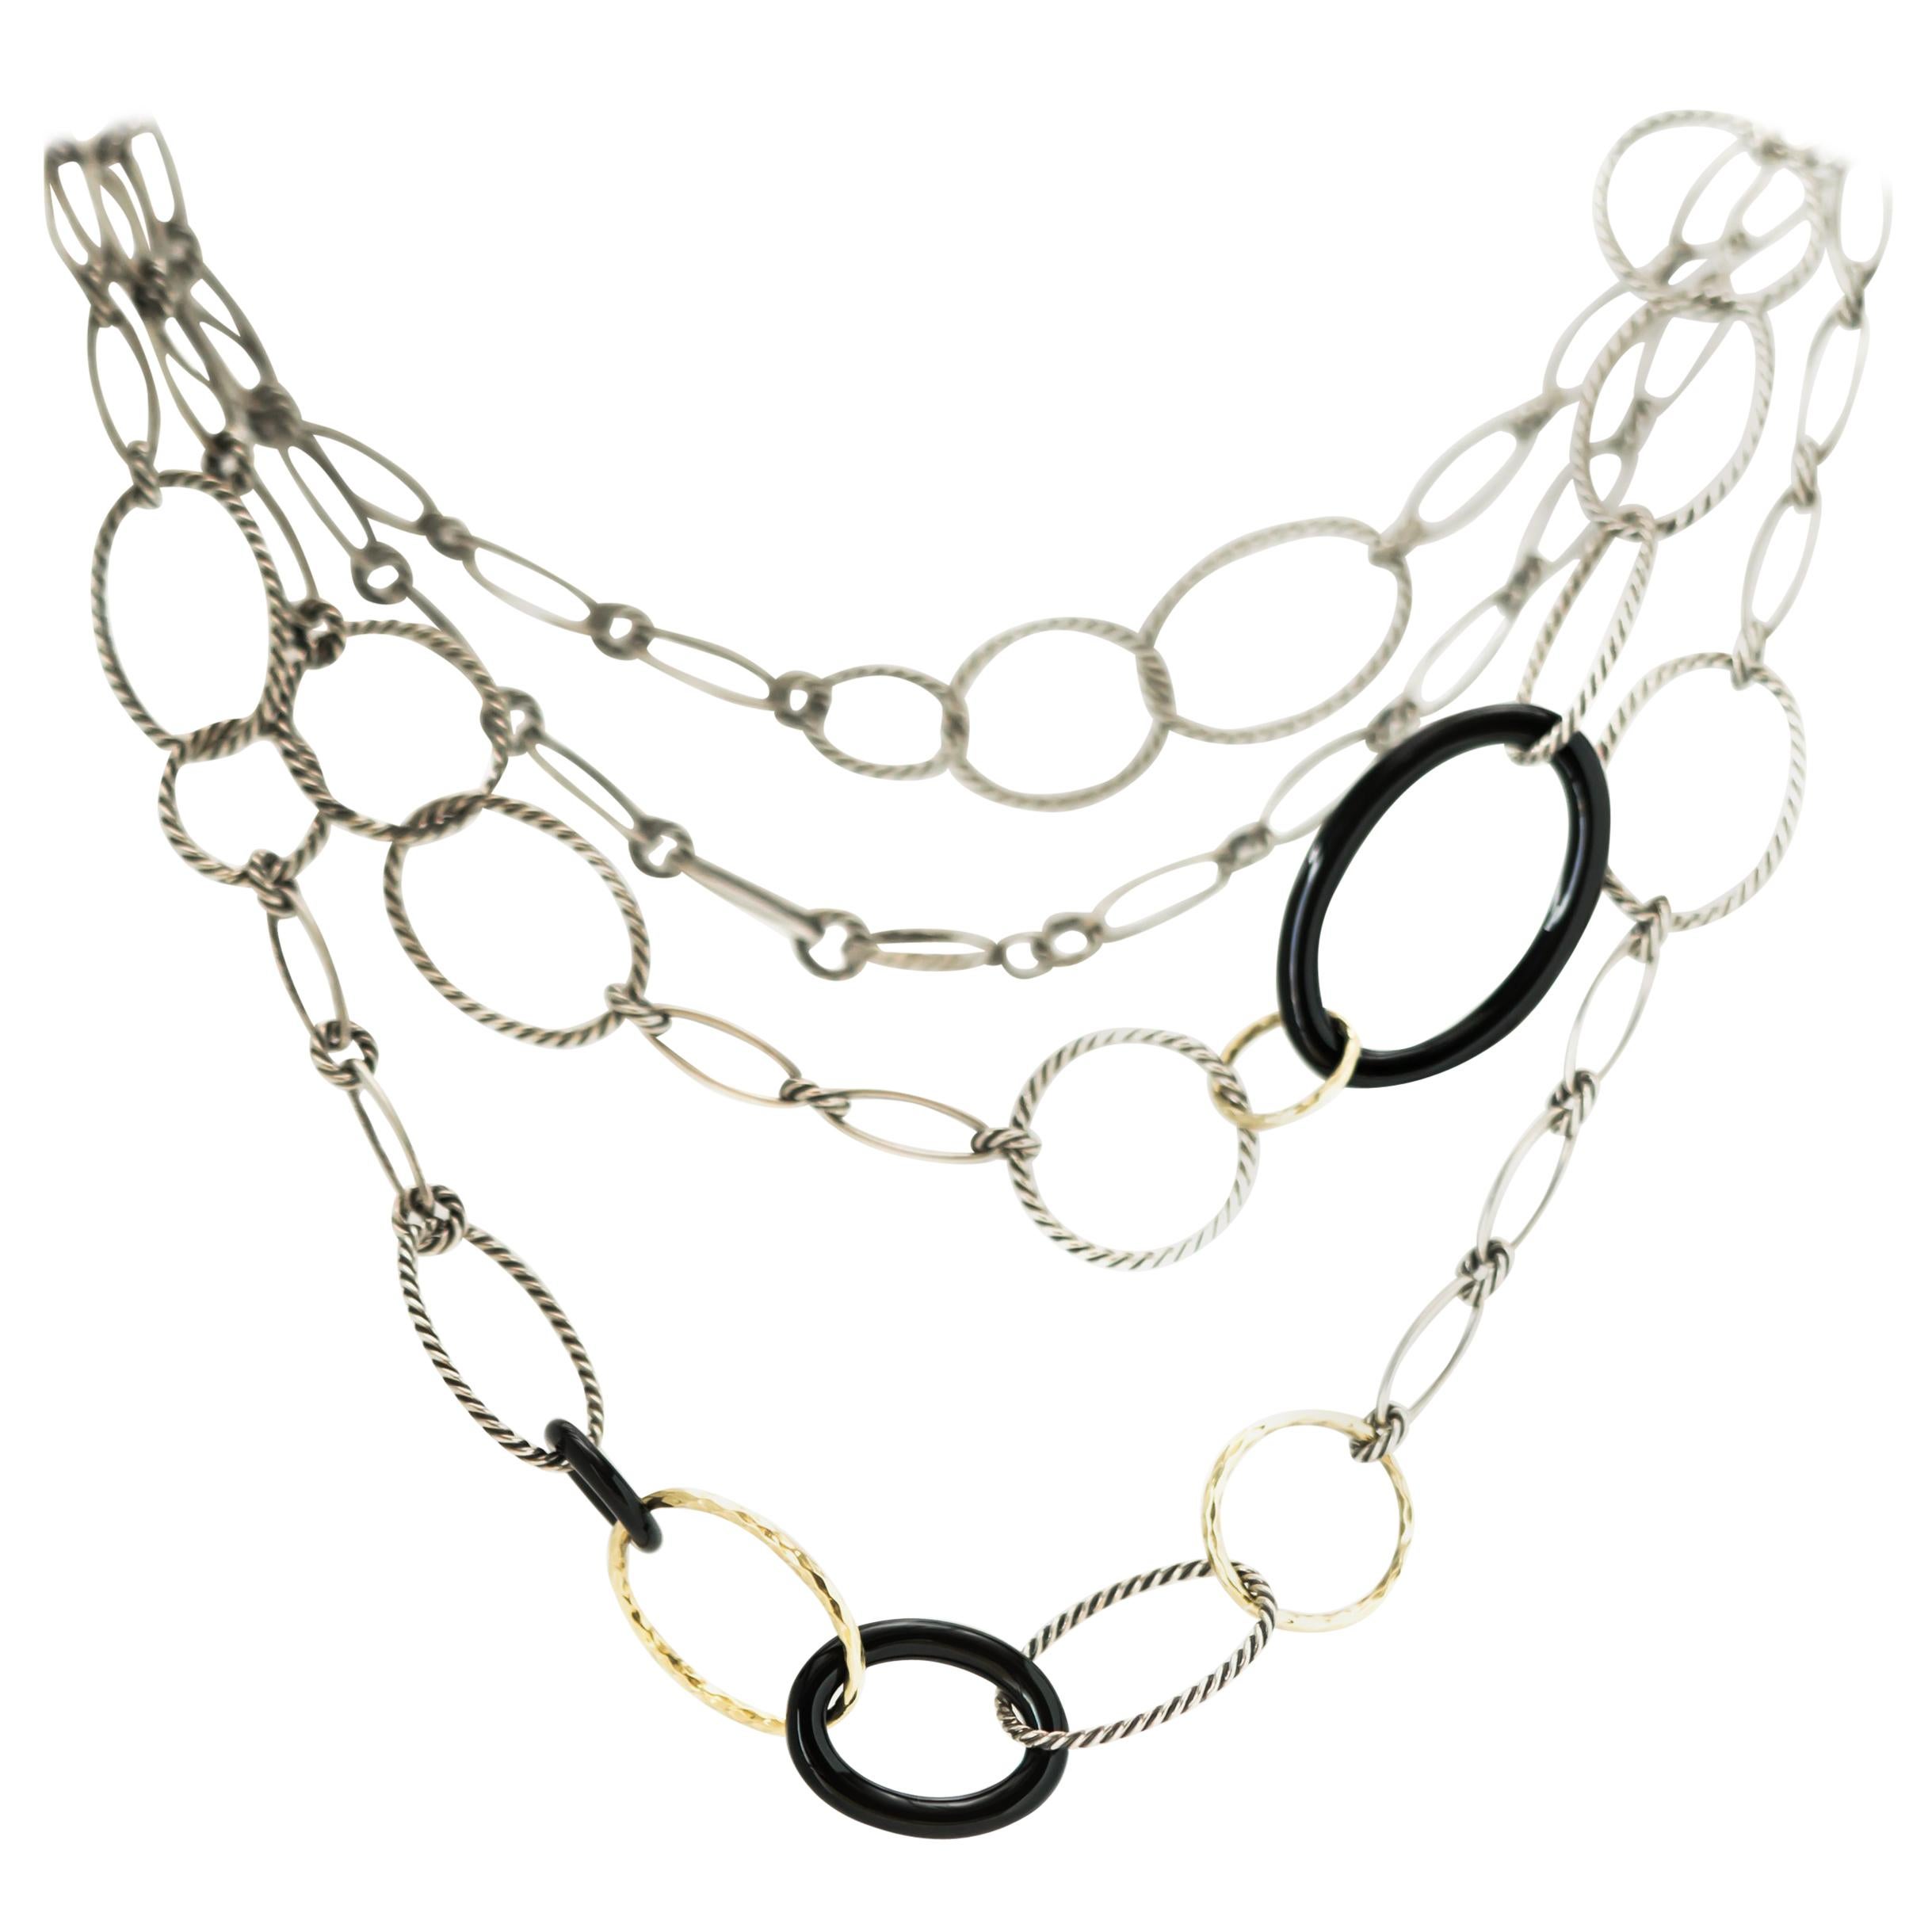 David Yurman Necklace in Sterling Silver, 18 Karat Yellow Gold and Onyx